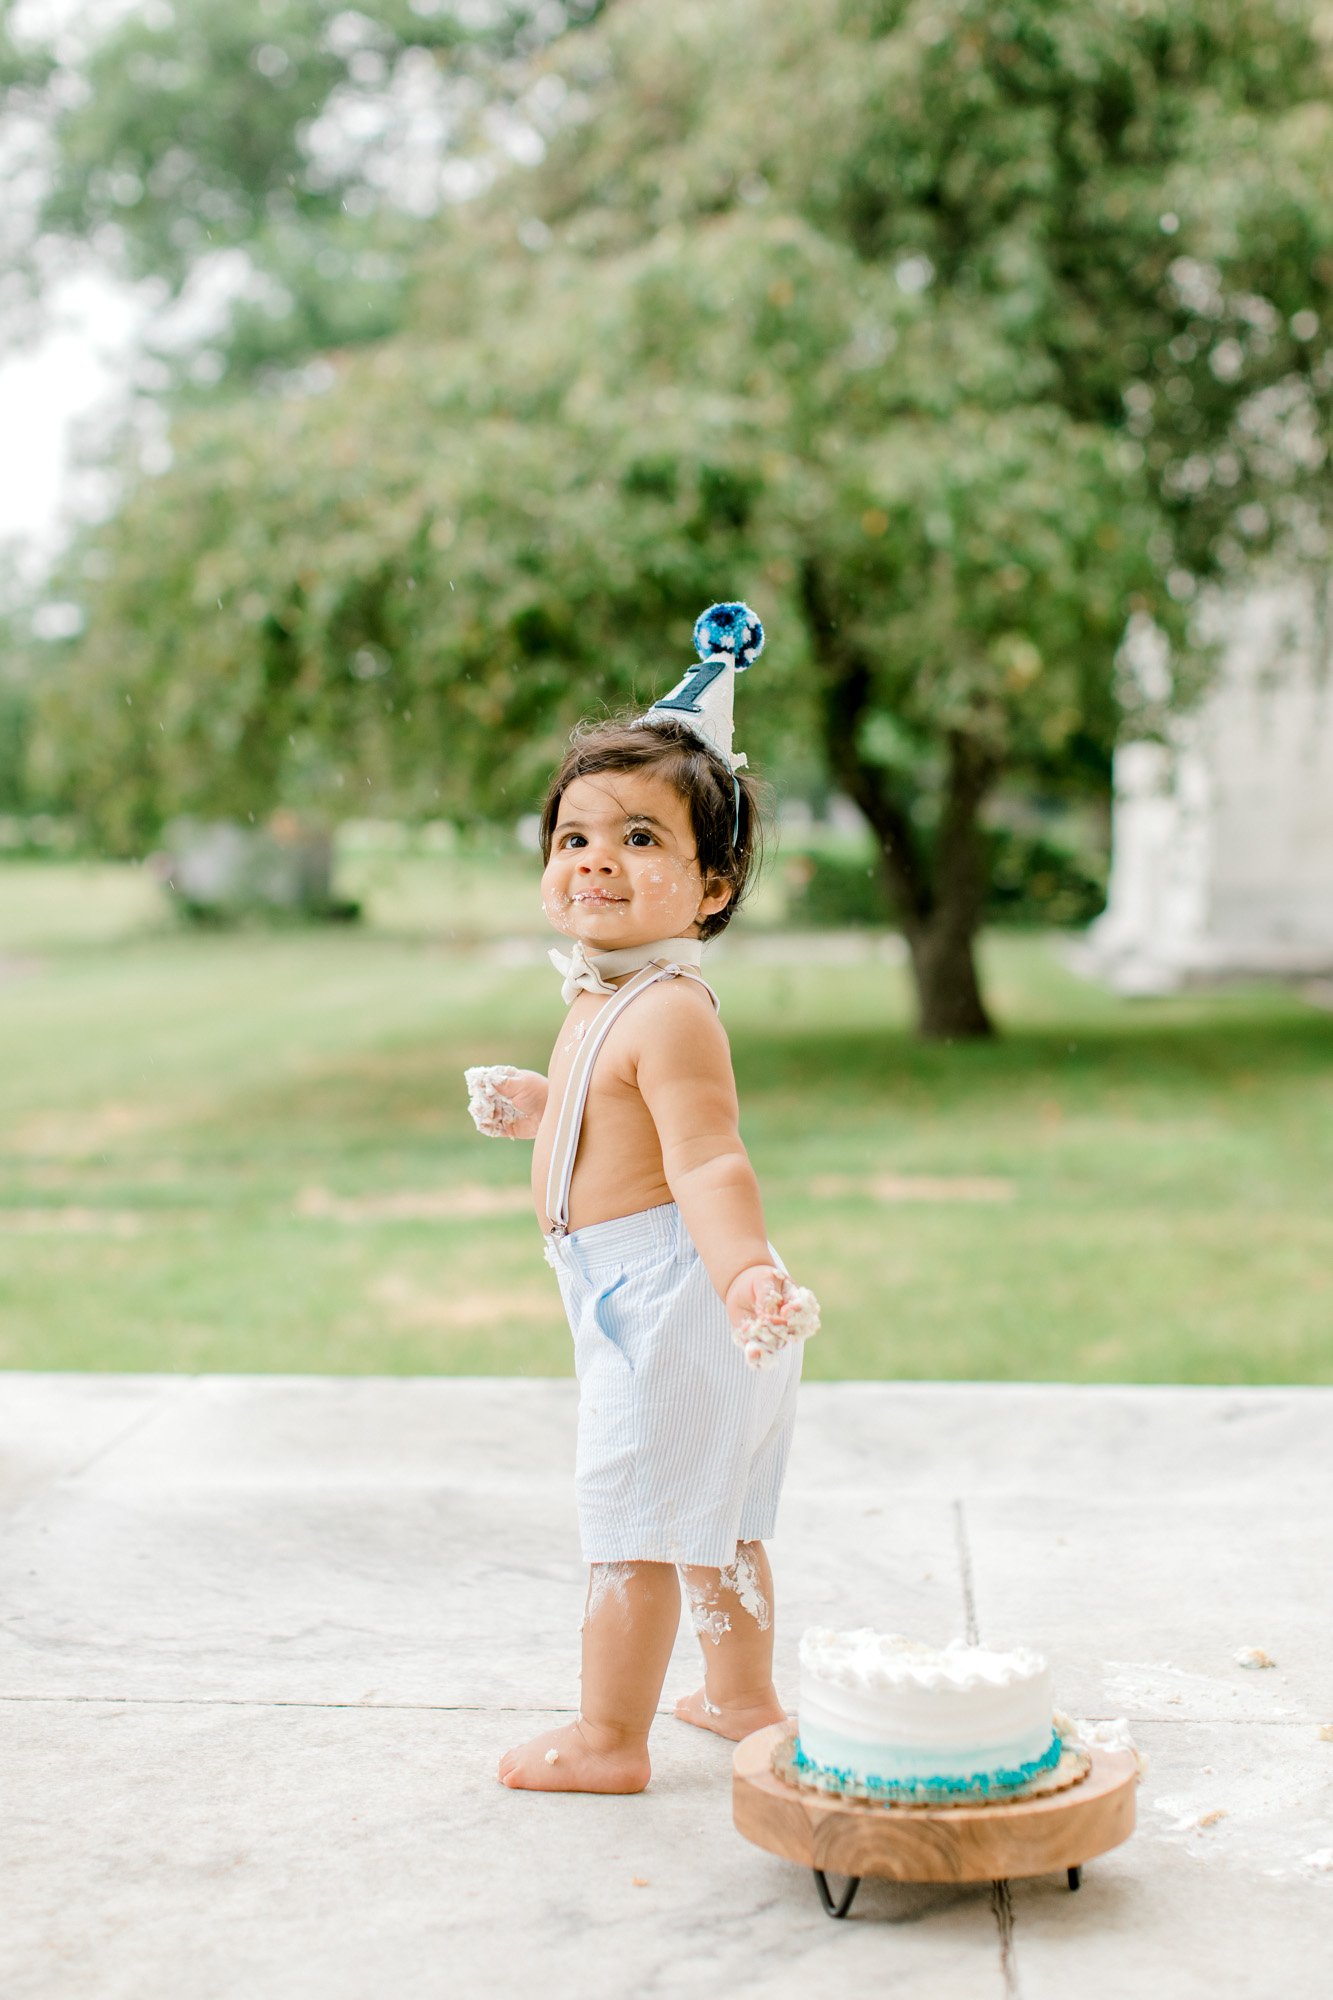 One Year Outdoor Cake Smash Birthday Session | West Michigan Family Photographer